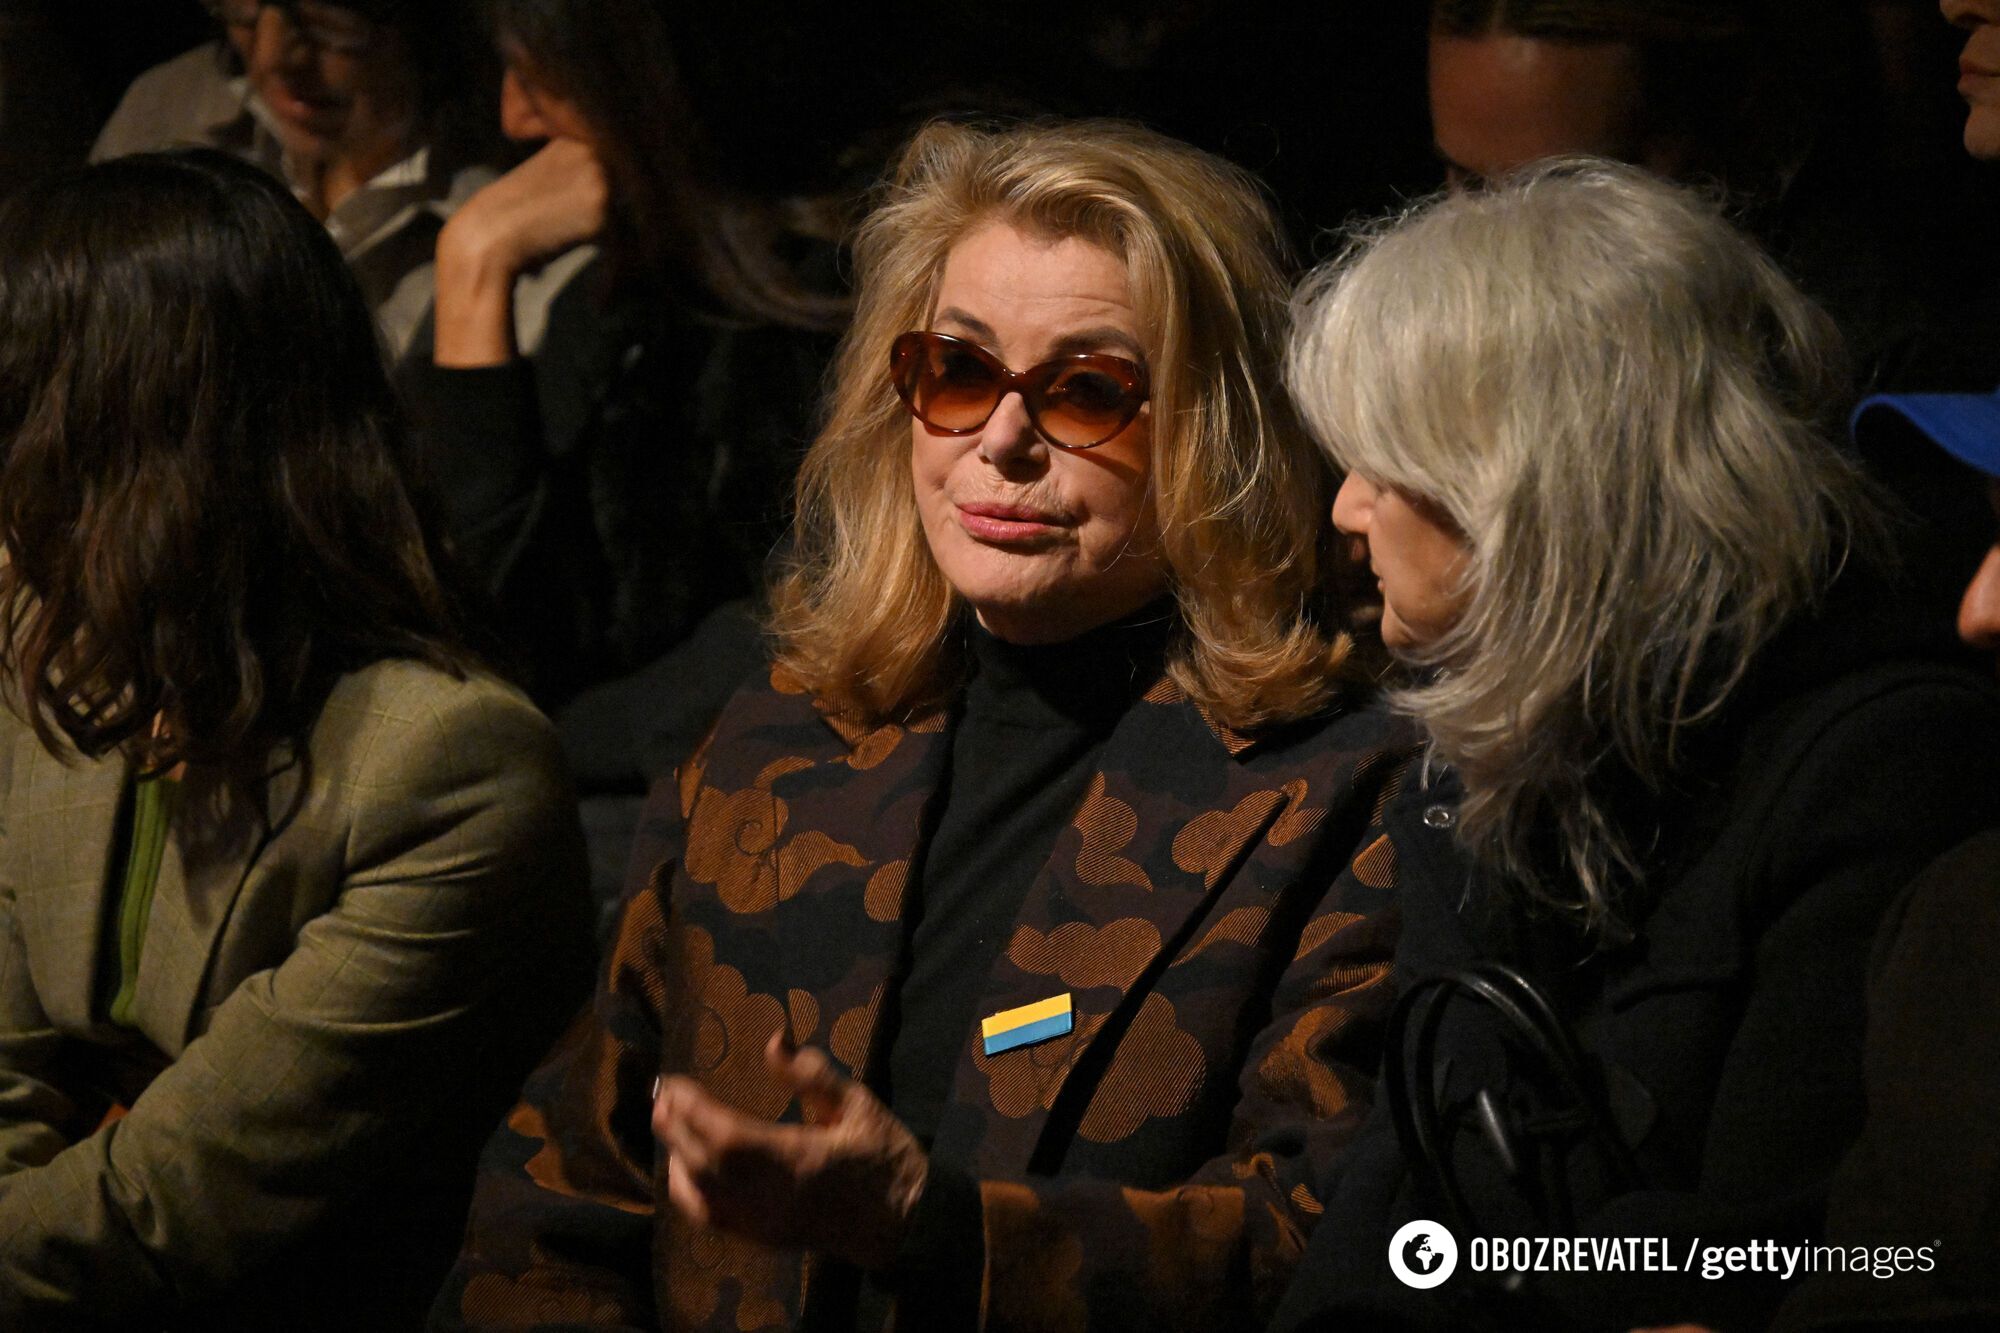 French movie star Catherine Deneuve got into an embarrassment for supporting Ukraine at Paris Fashion Week, but quickly made amends. Photos